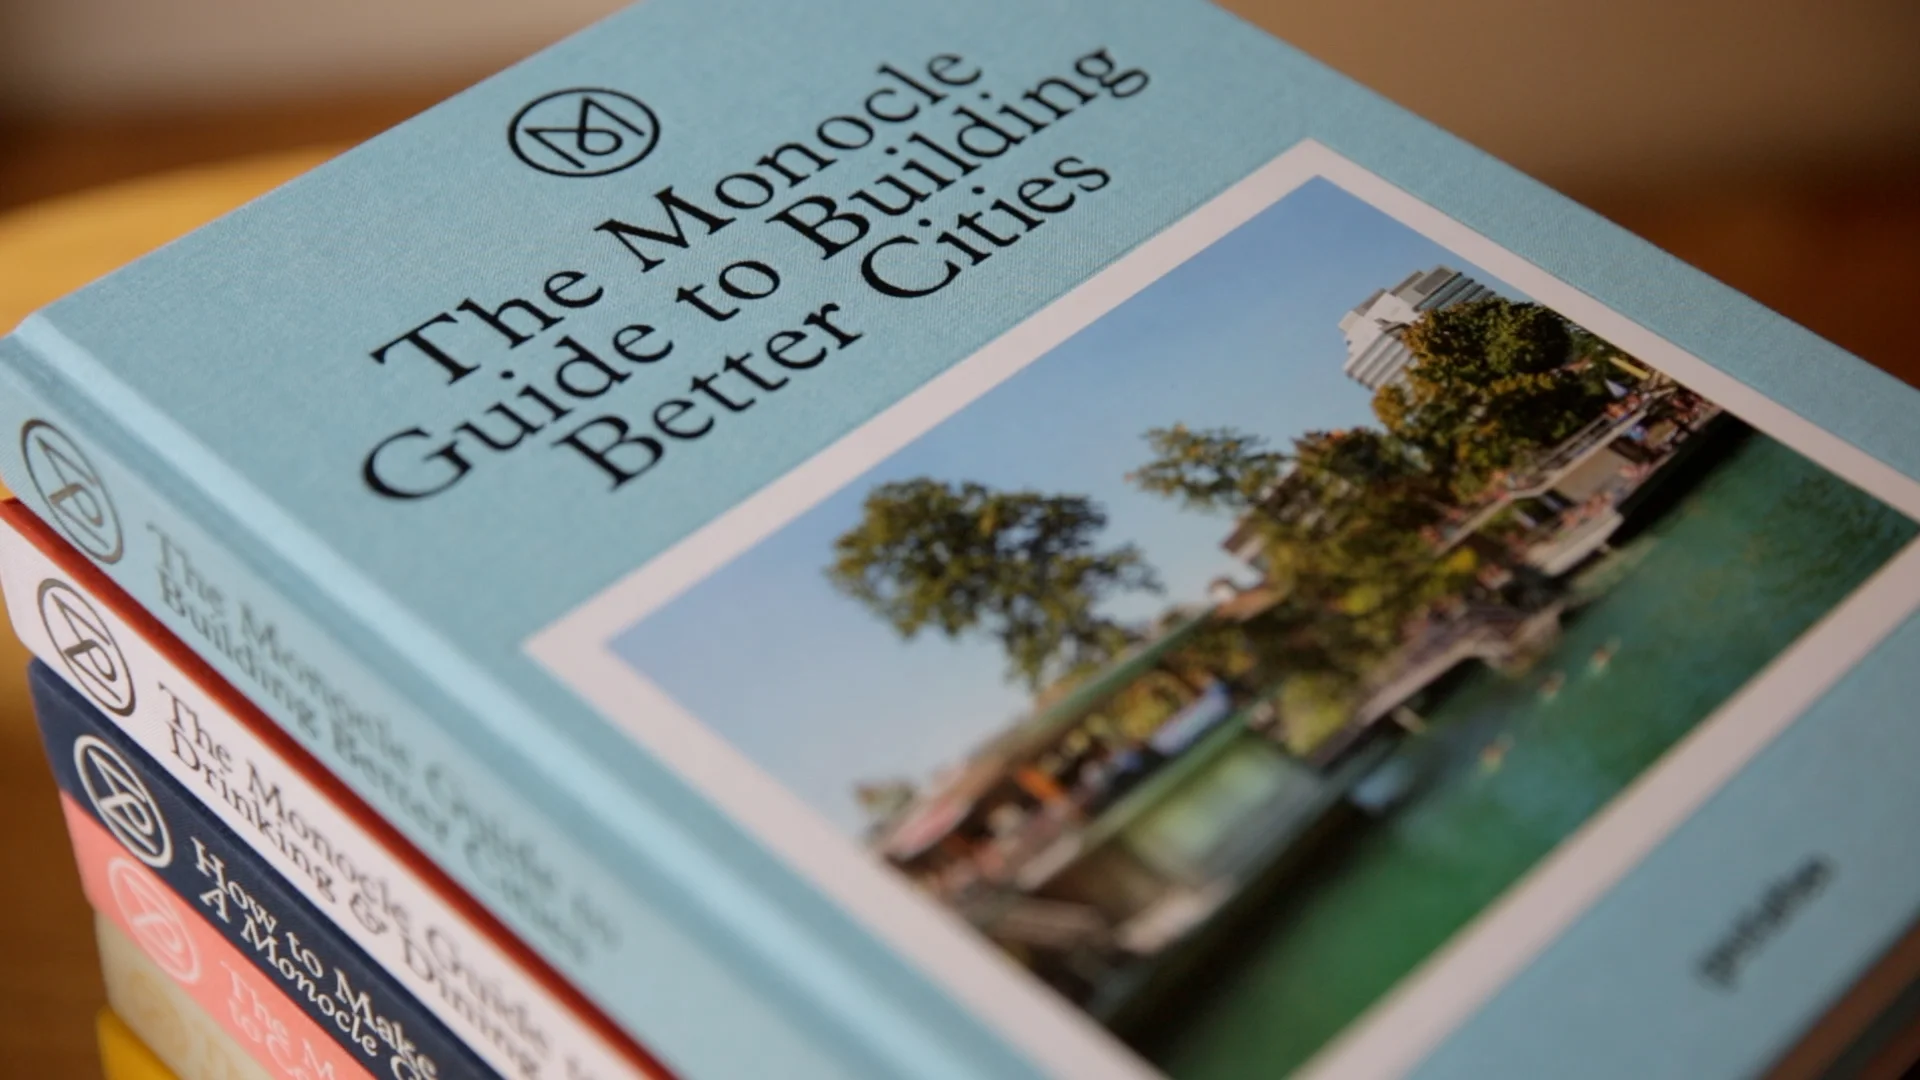 The Monocle Guide to Building Better Cities [Book]